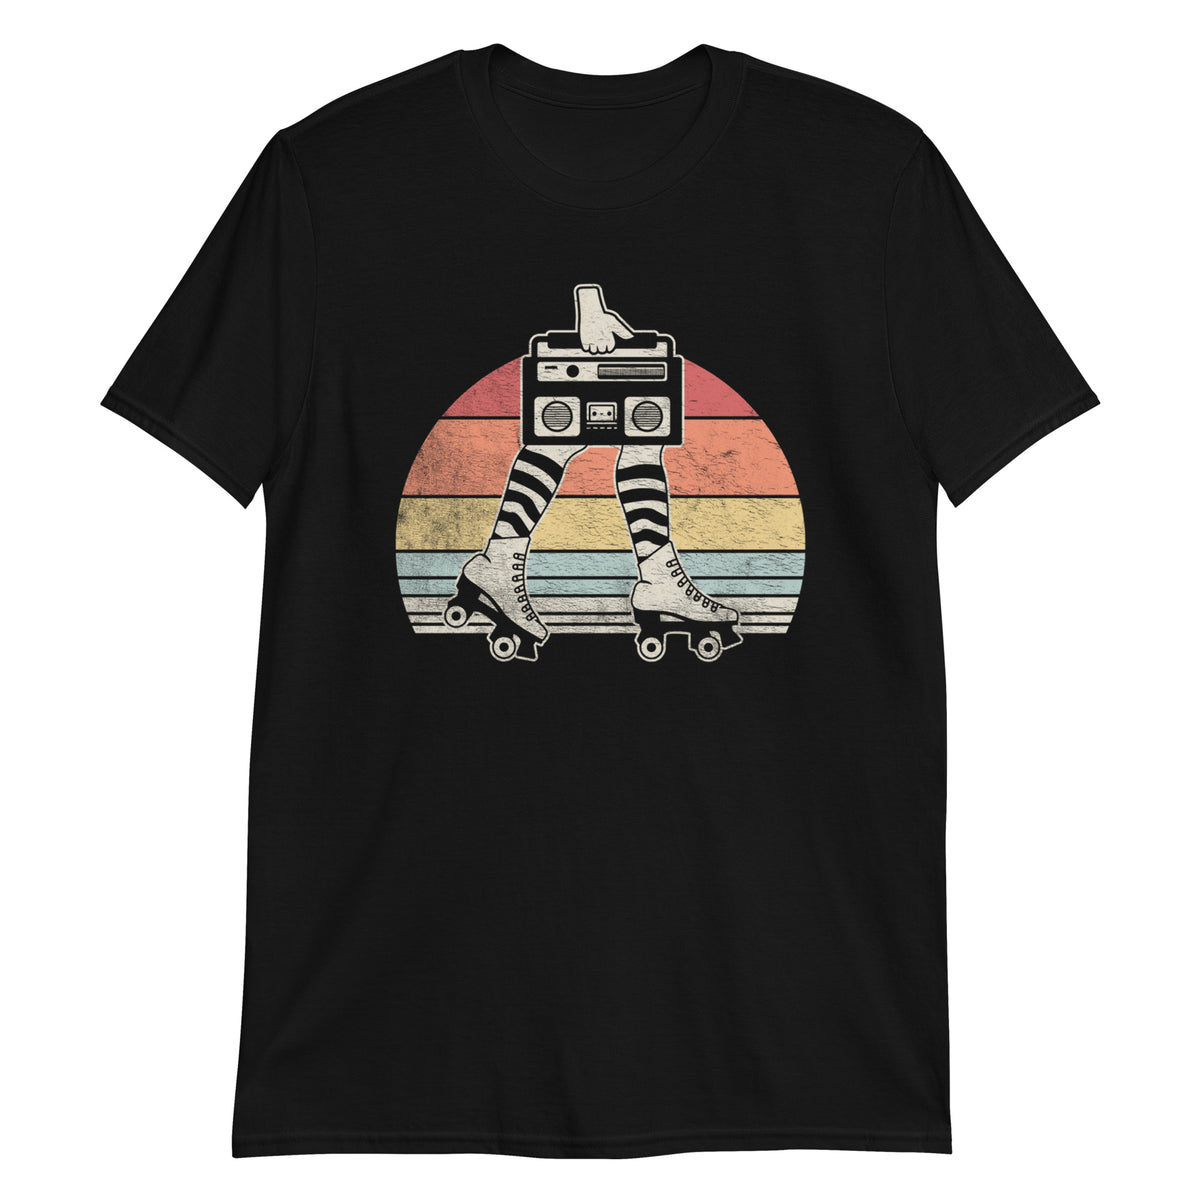 Let's Roll T-Shirt